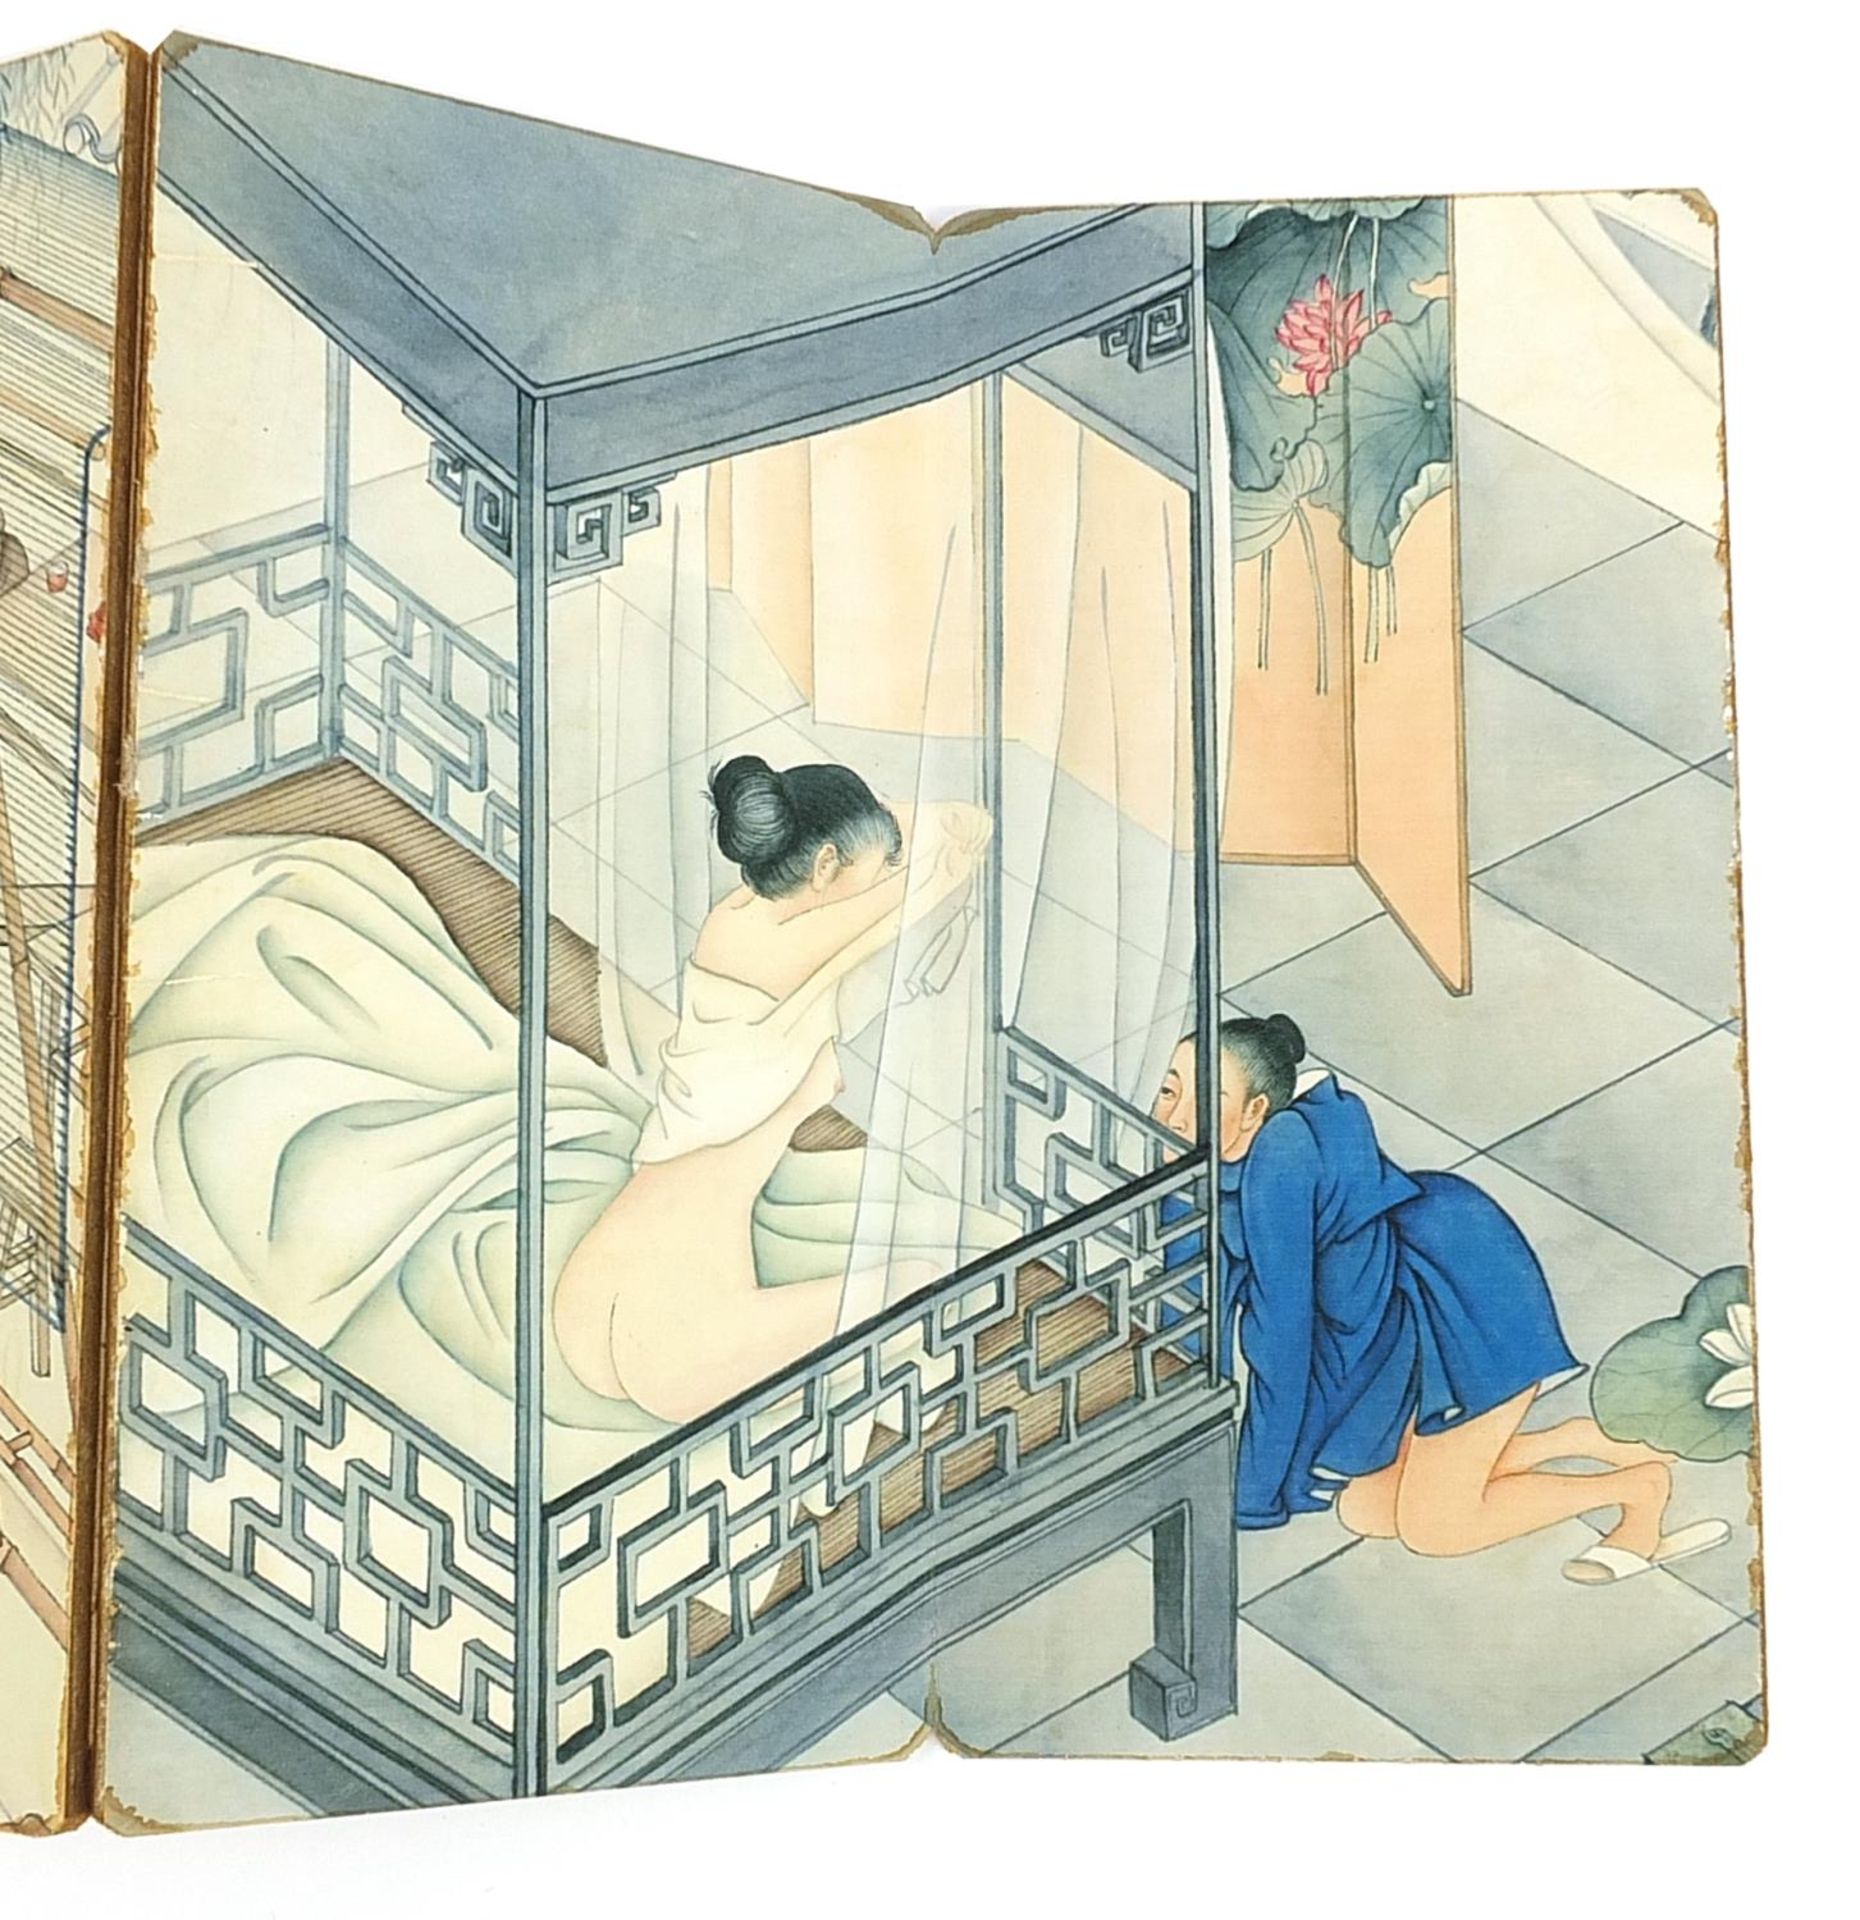 Chinese folding book depicting erotic scenes - Image 6 of 8